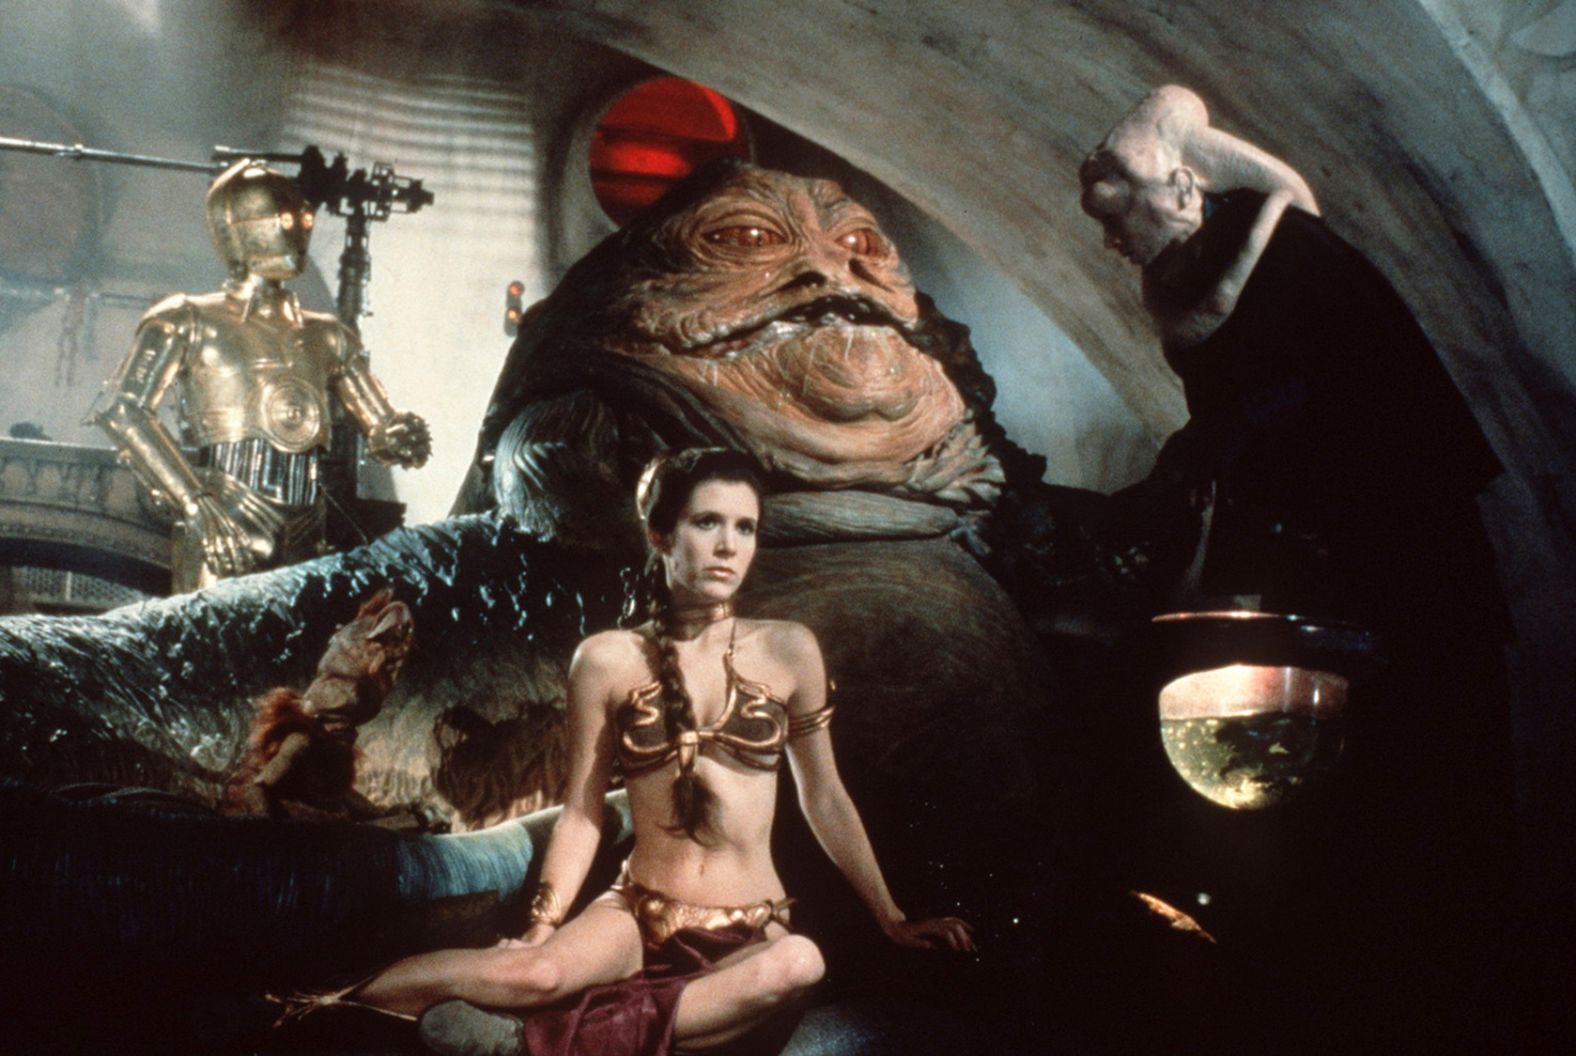 Fisher drew almost as much attention for Princess Leia's hair and wardrobe as she did for her performances in the movies. In 1983's "Return of the Jedi," Leia wore her brown hair in two enormous swirly buns over her ears, and she donned a revealing metal bikini as Jabba the Hutt's captive.